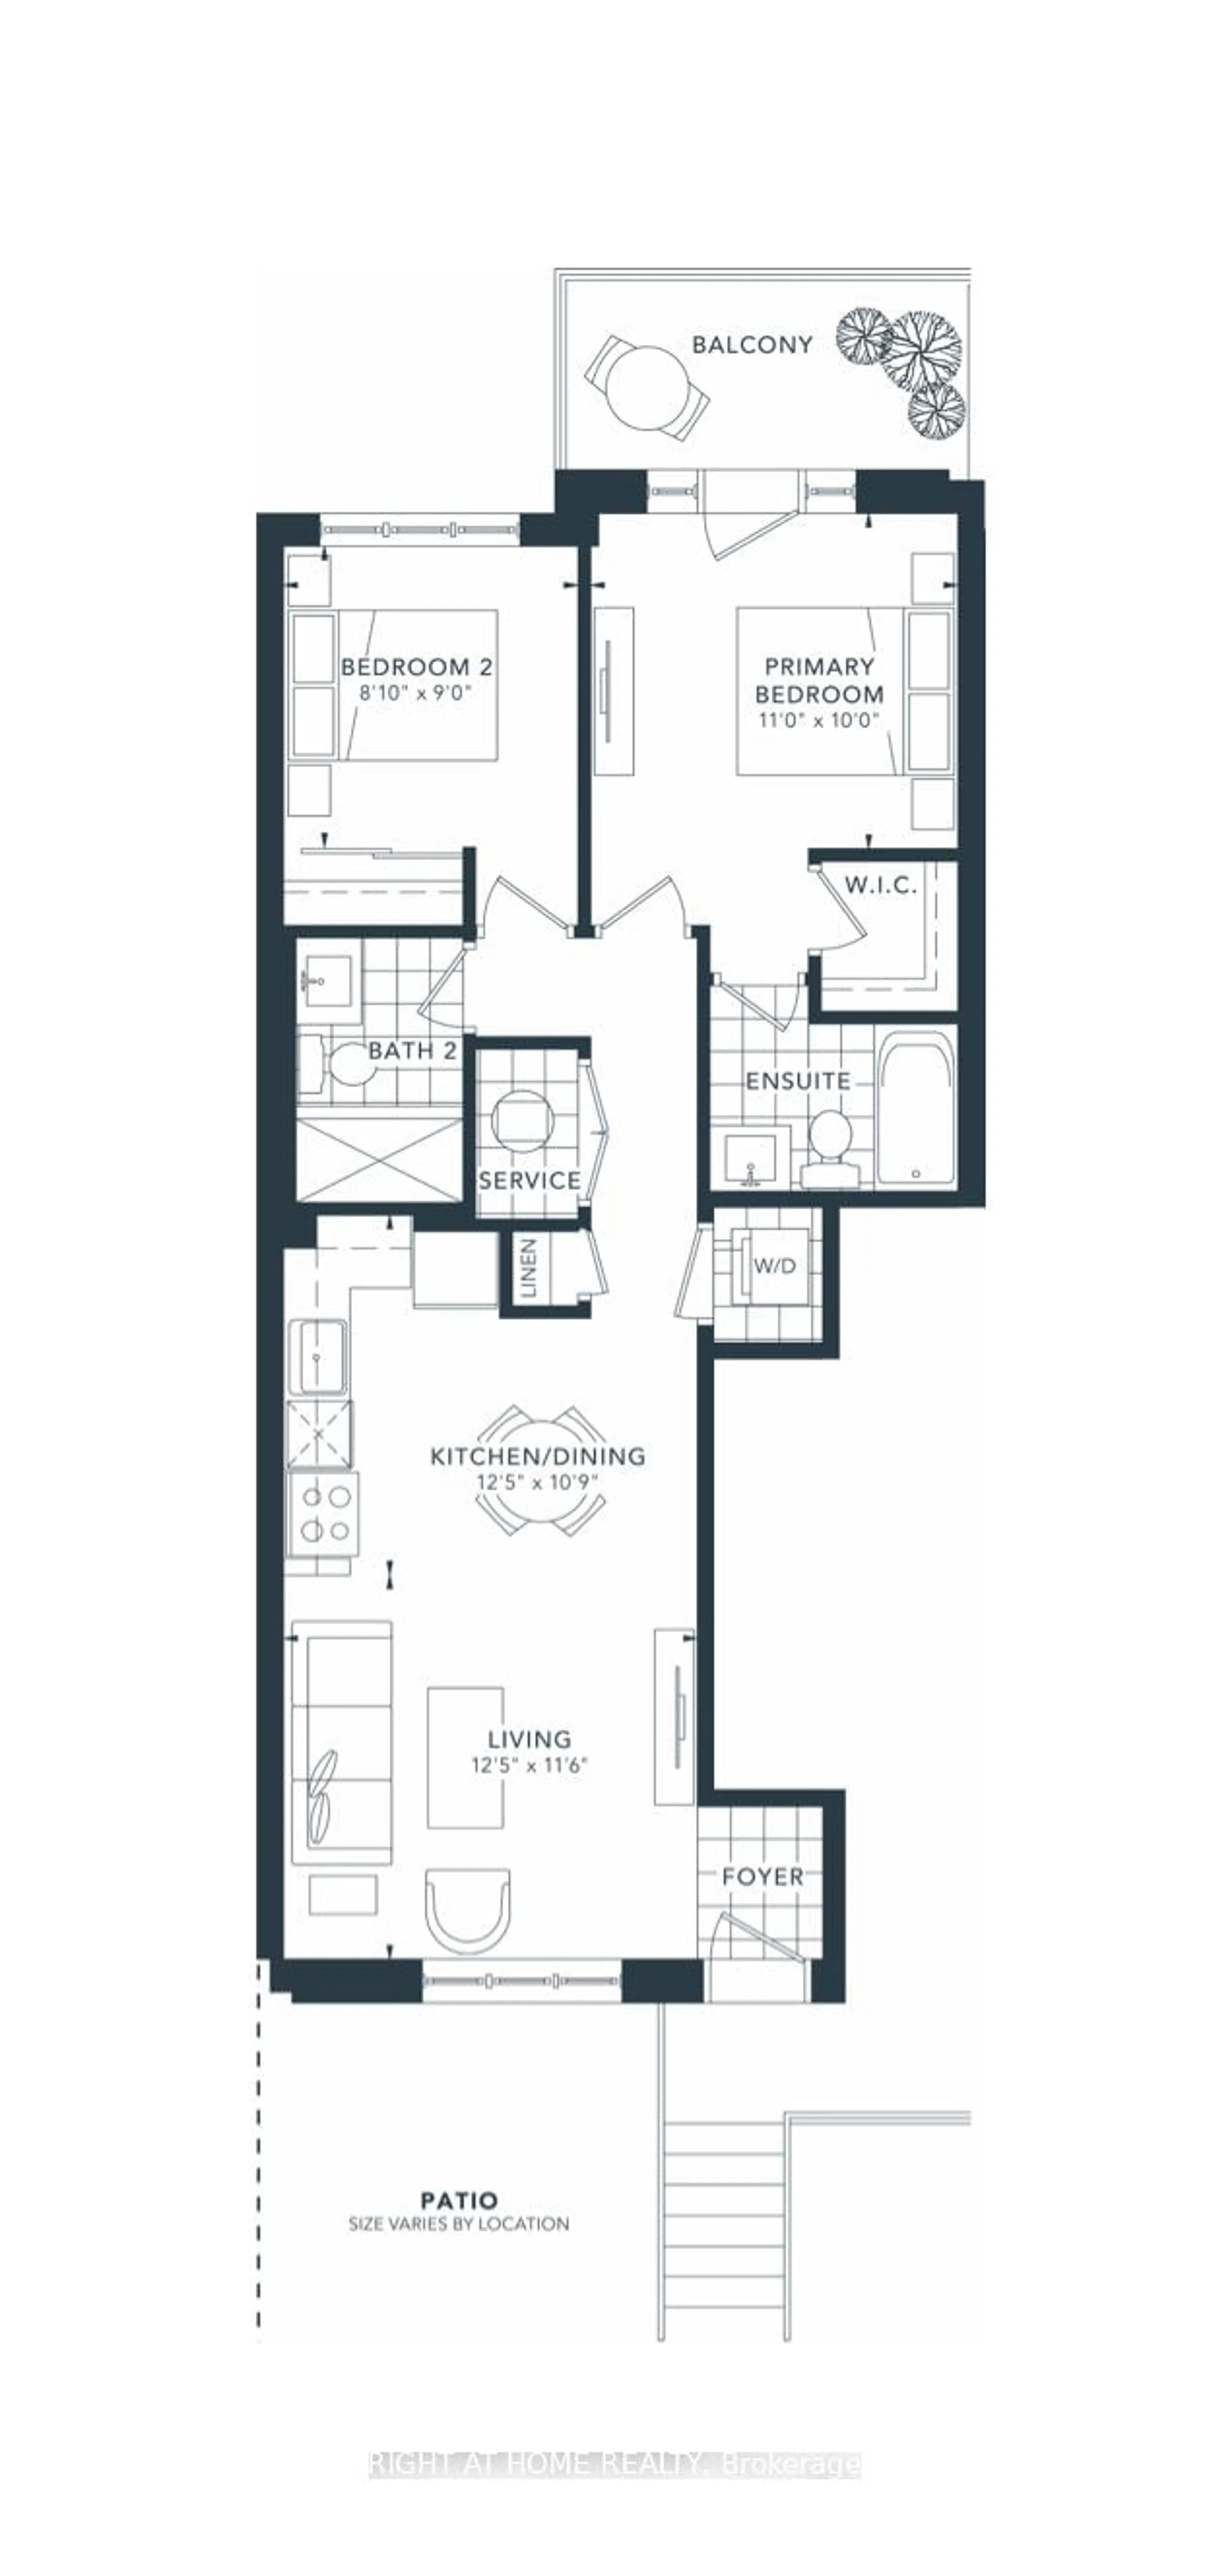 Floor plan for 4005 Hickory Dr #62, Mississauga Ontario L1W 1L1